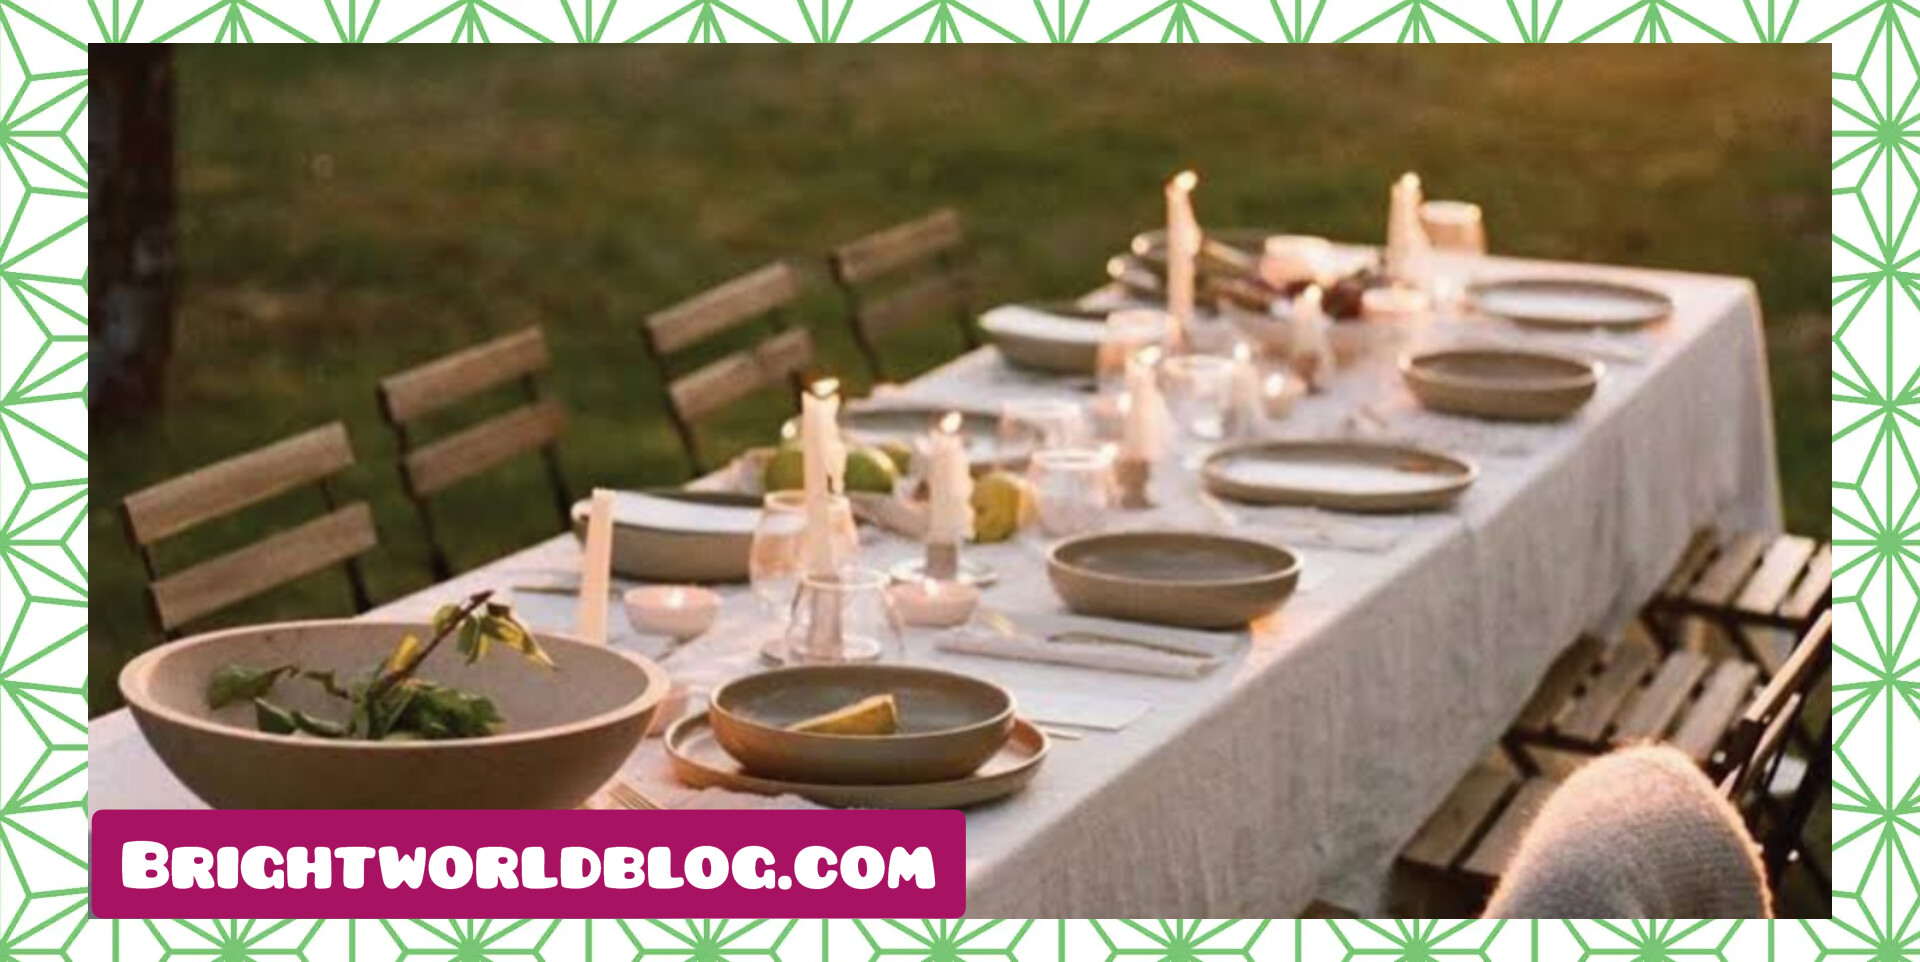 How Much Does A Rehearsal Dinner Cost?